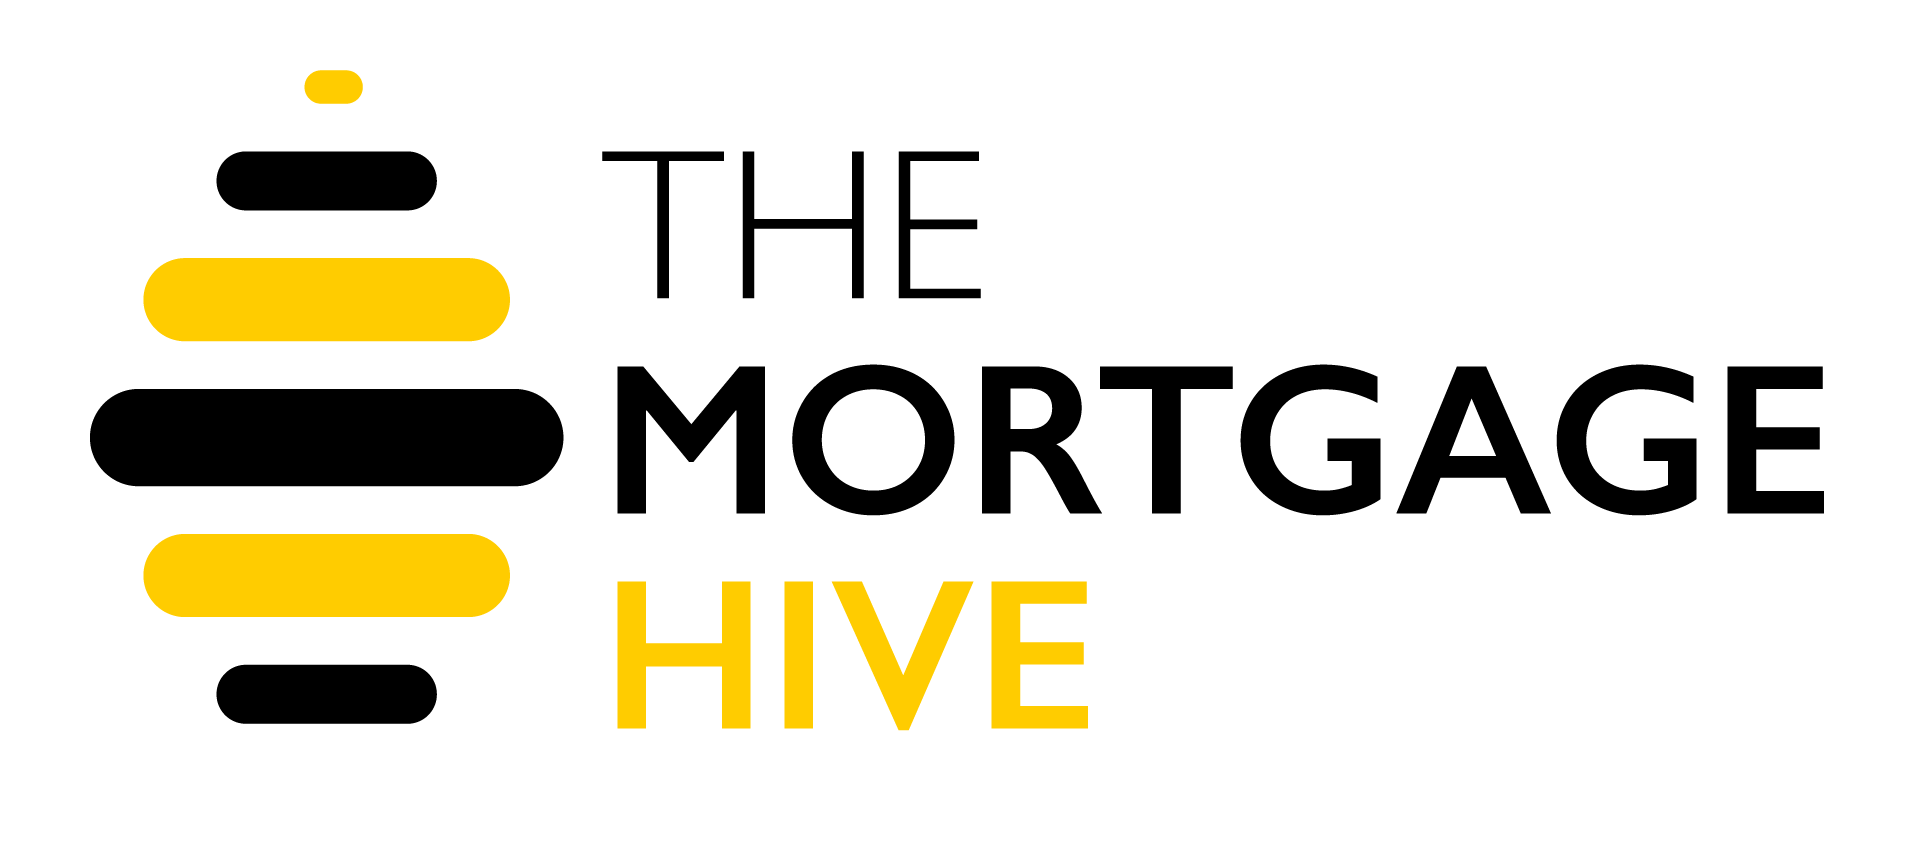 Hive Logo - Best Mortgage Deals - The Mortgage Hive is your Home!